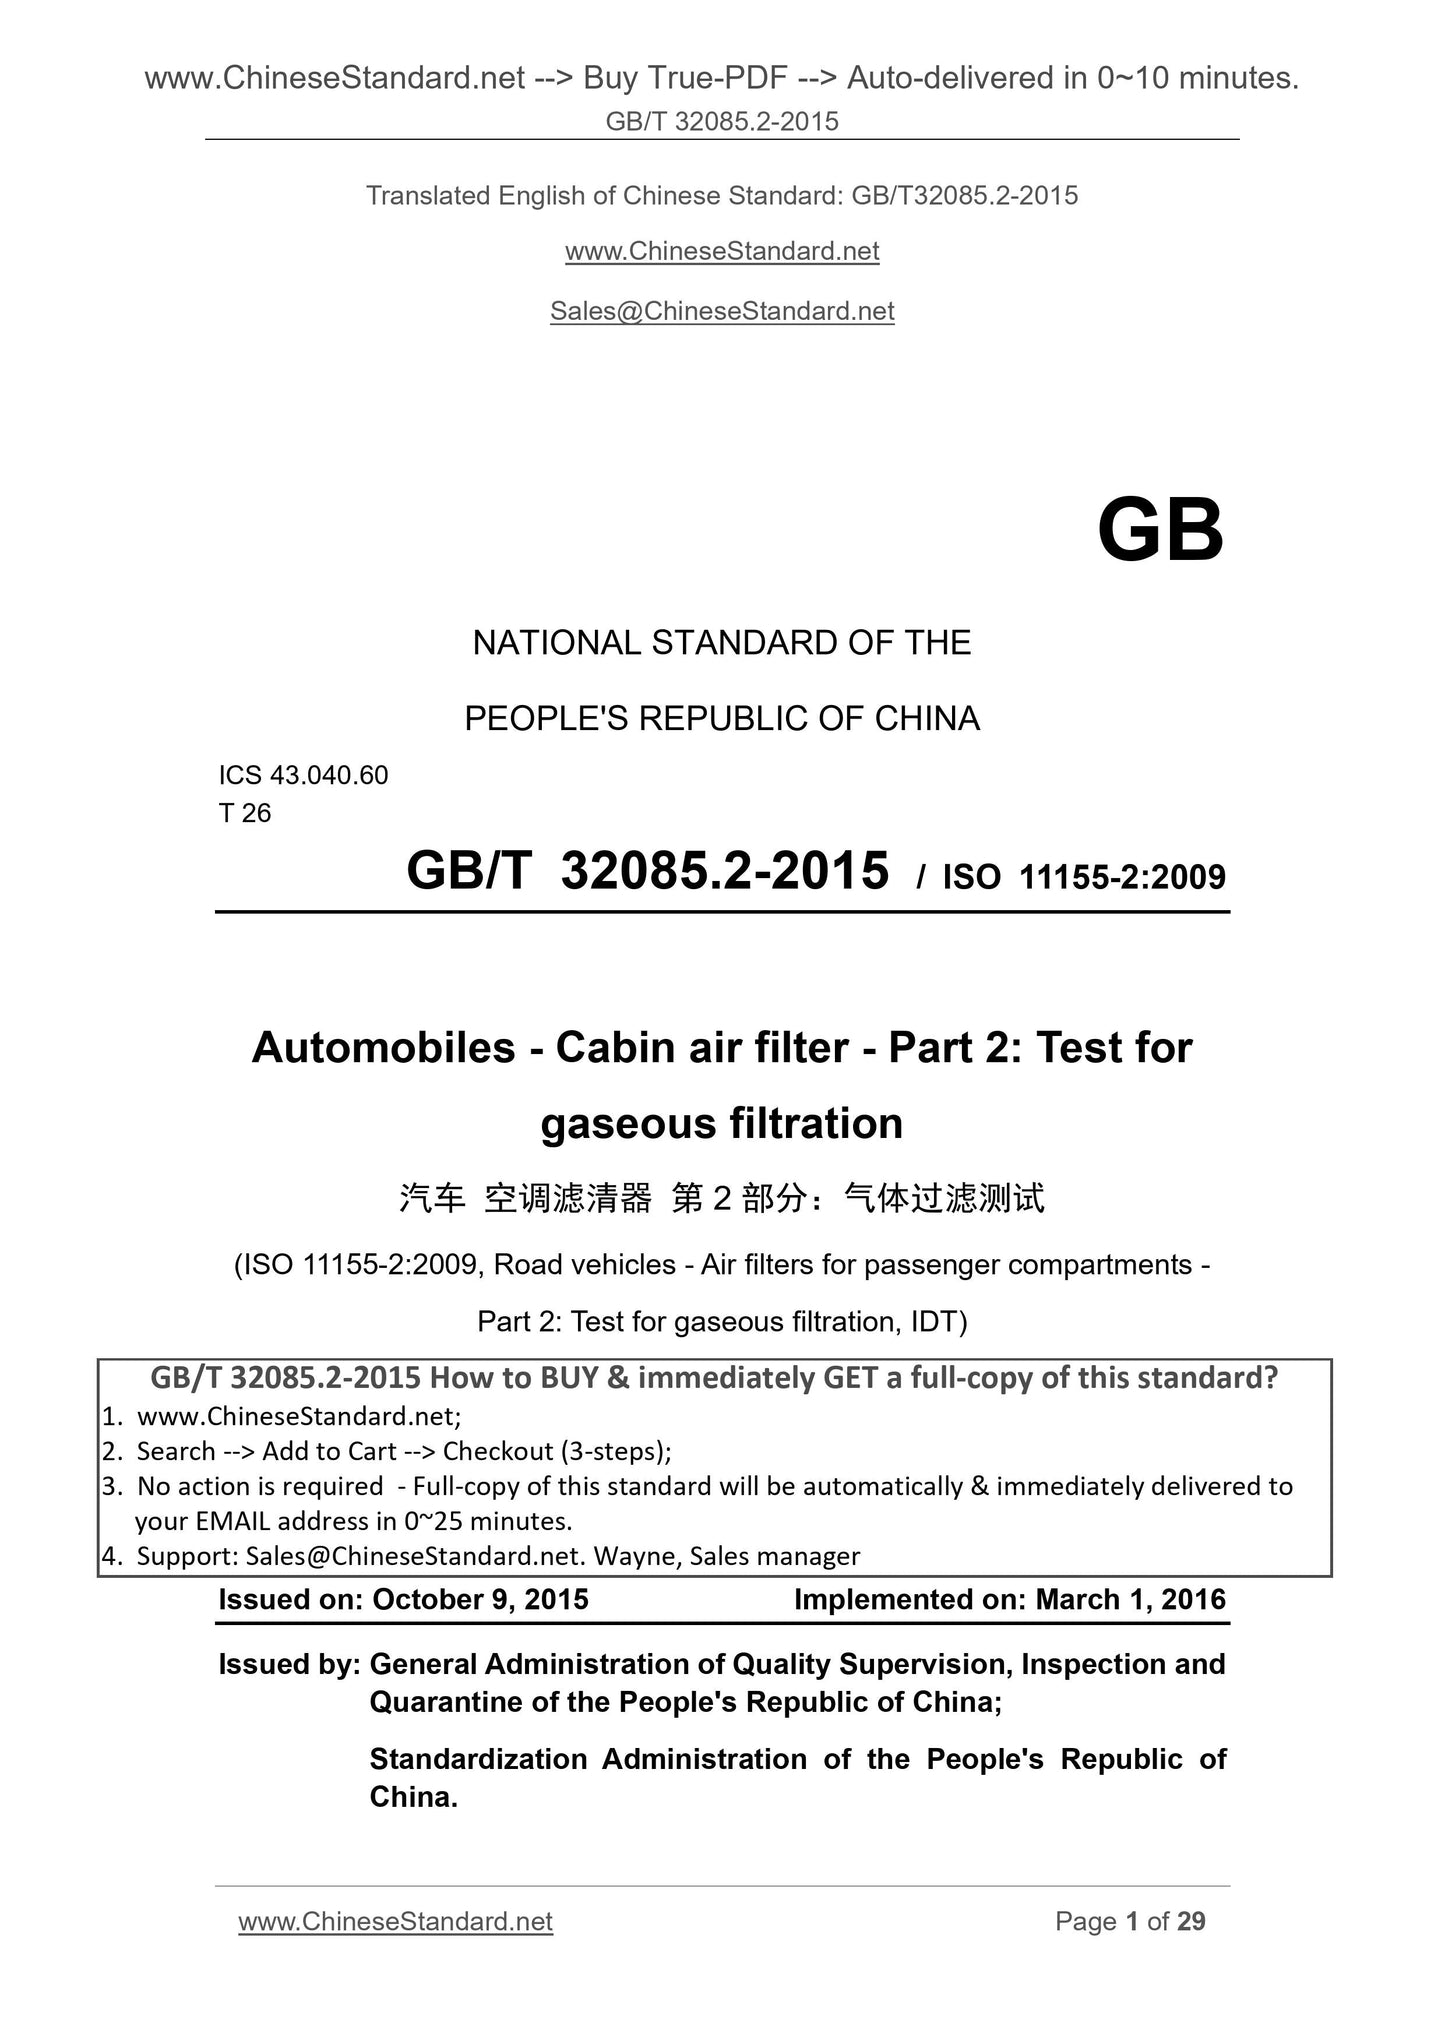 GB/T 32085.2-2015 Page 1